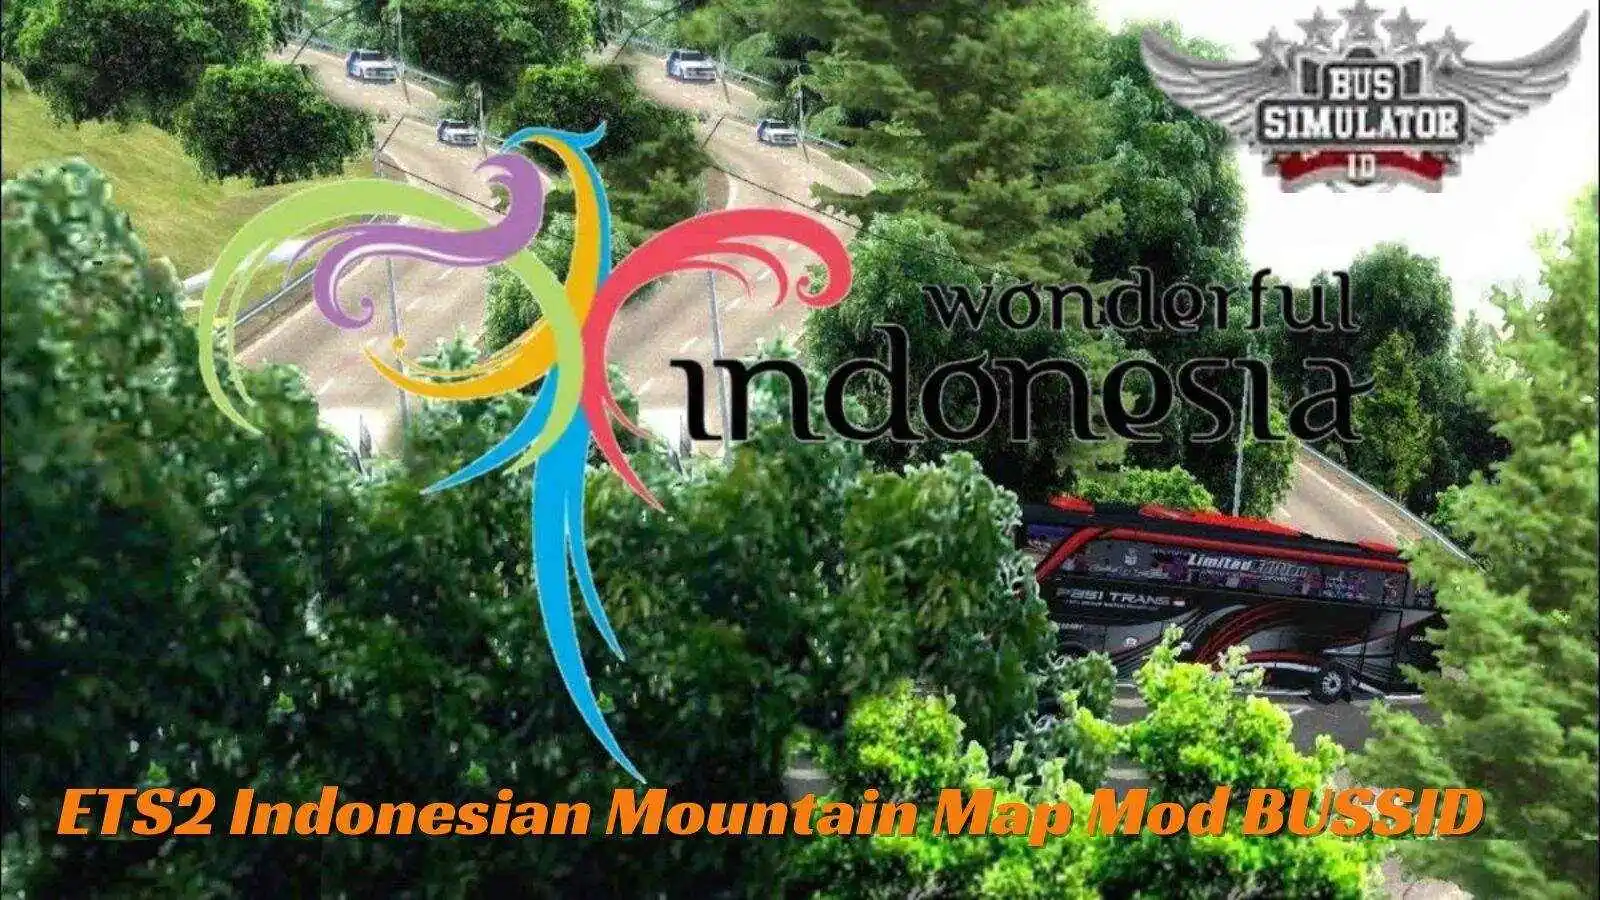 ETS2-Indonesian-Mountain-Map-Mod-BUSSID